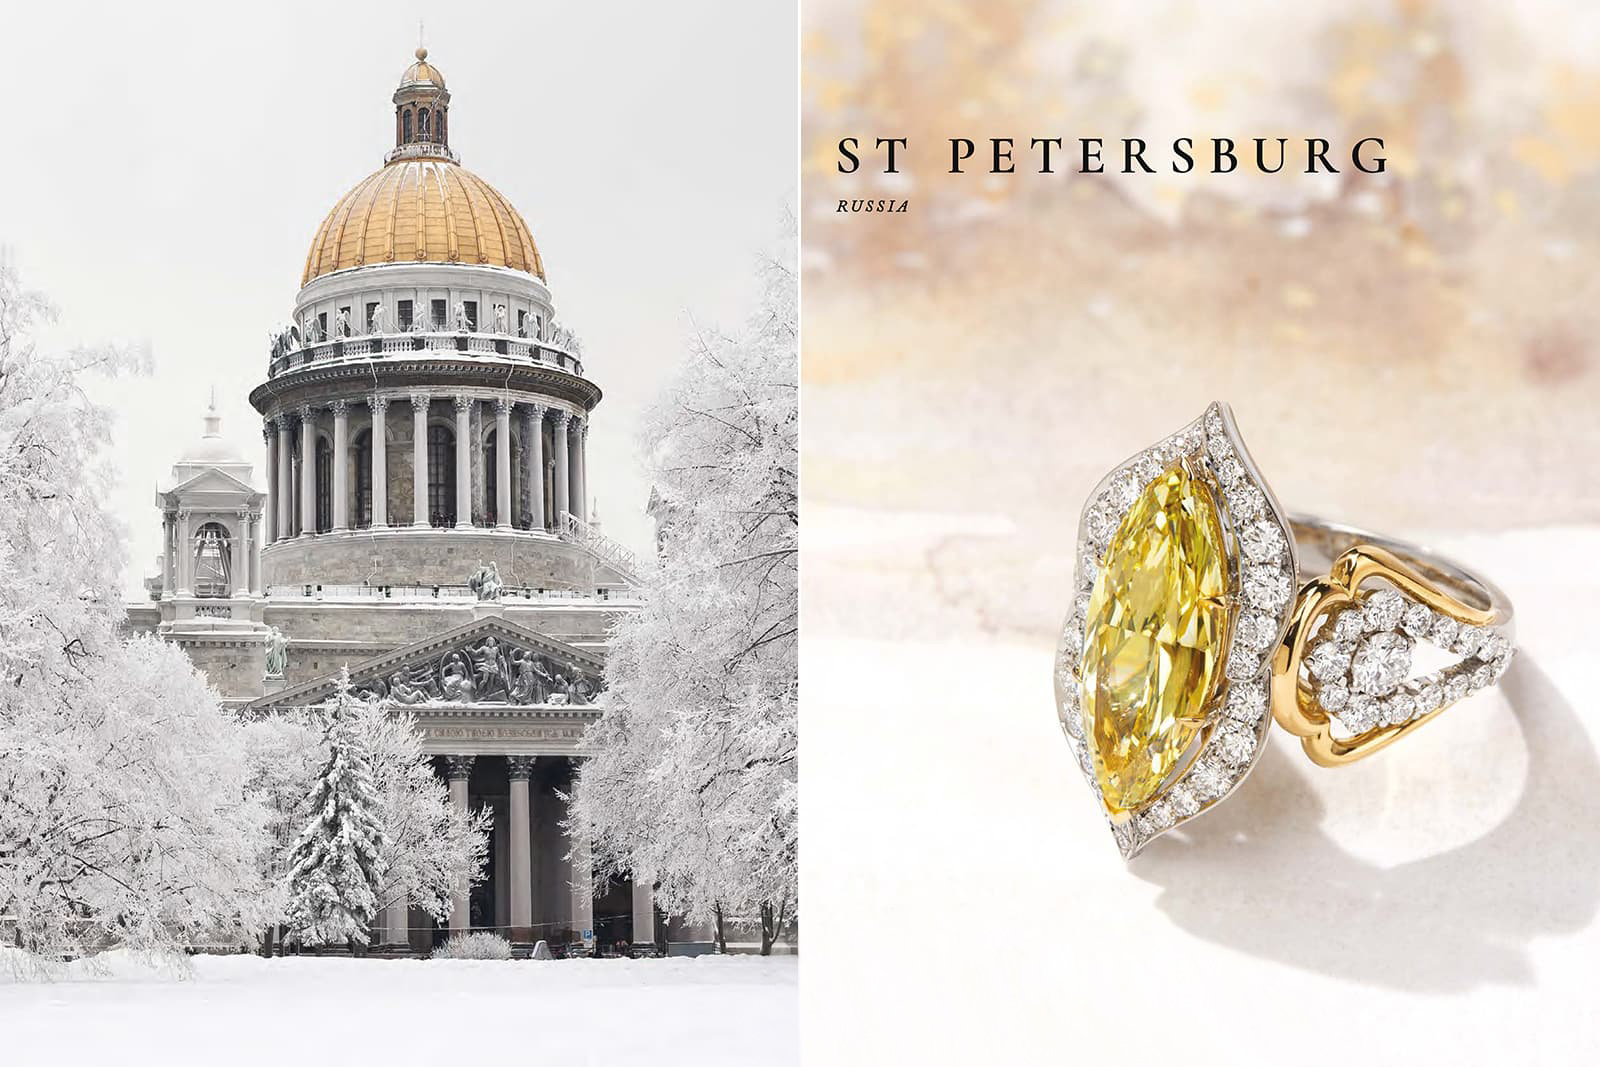 Boodles St. Petersburg ring with an elongated yellow diamond and white diamonds from the ‘Around the World in 16 Days’ High Jewellery collection, inspired by the Fontanka river in St. Petersburg, Russia 